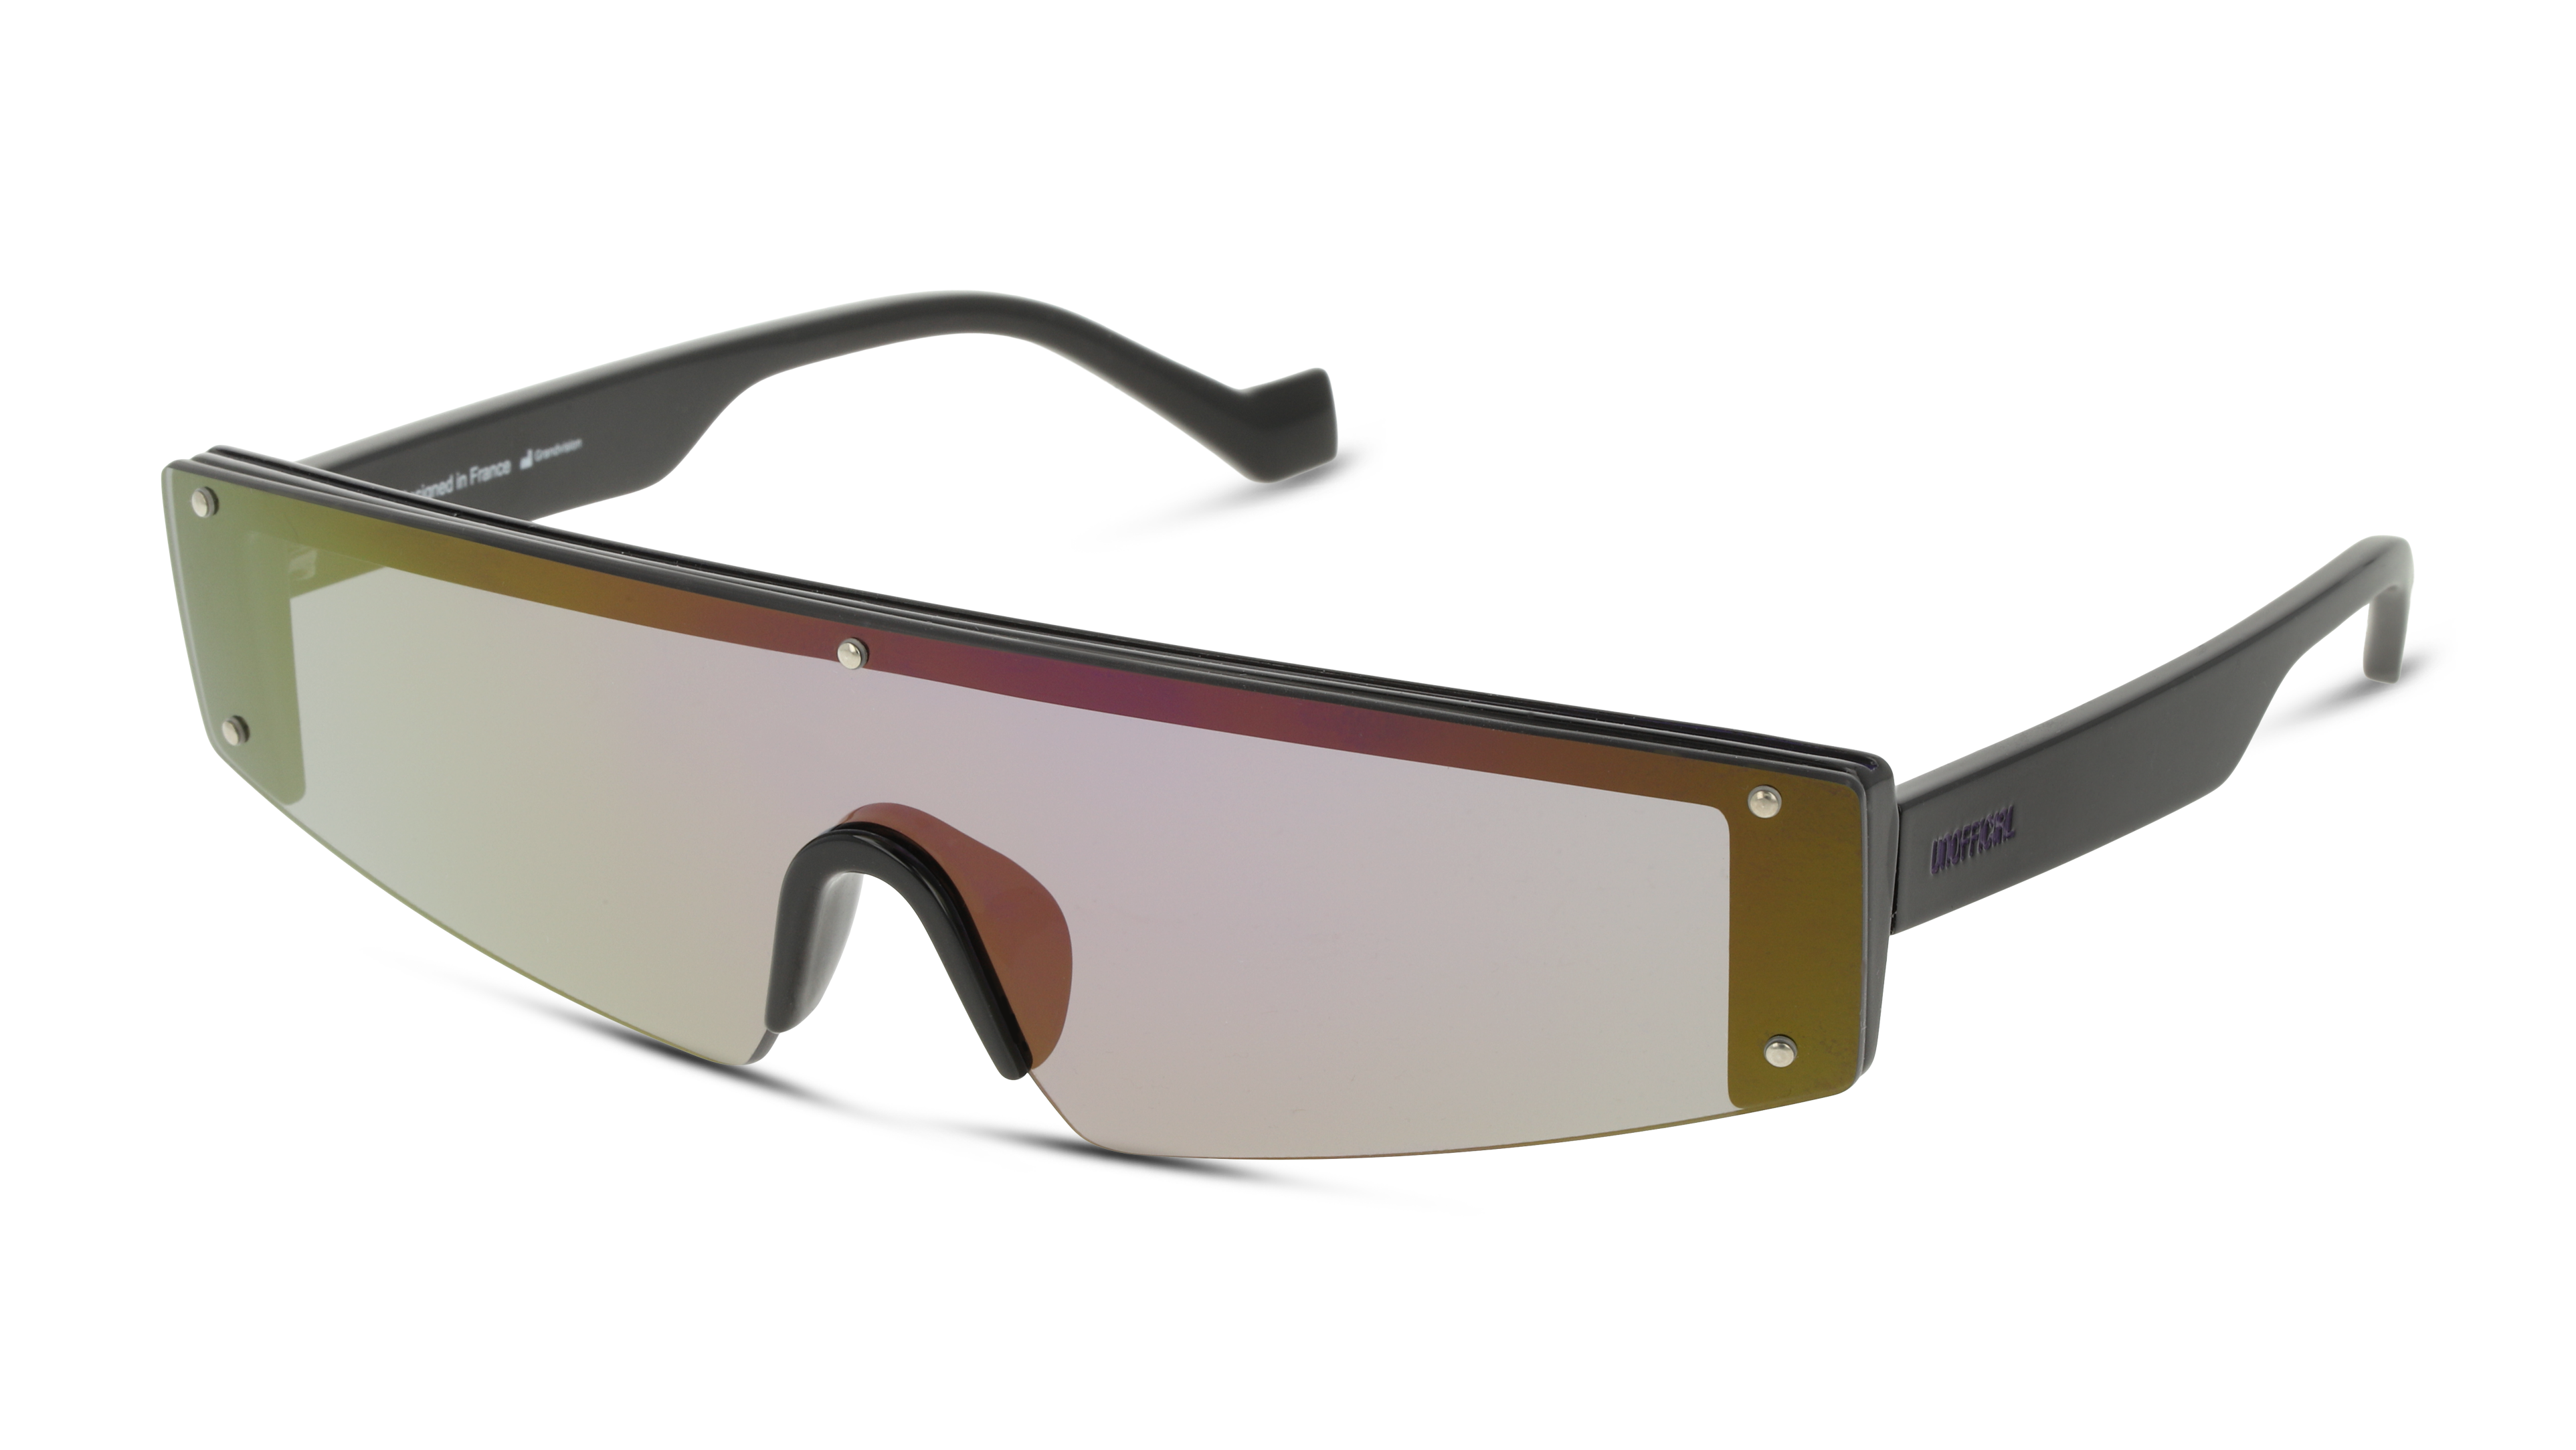 Angle_Left01 Fortnite with Unofficial UNSU0148 (BBGV) Sunglasses Grey / Black